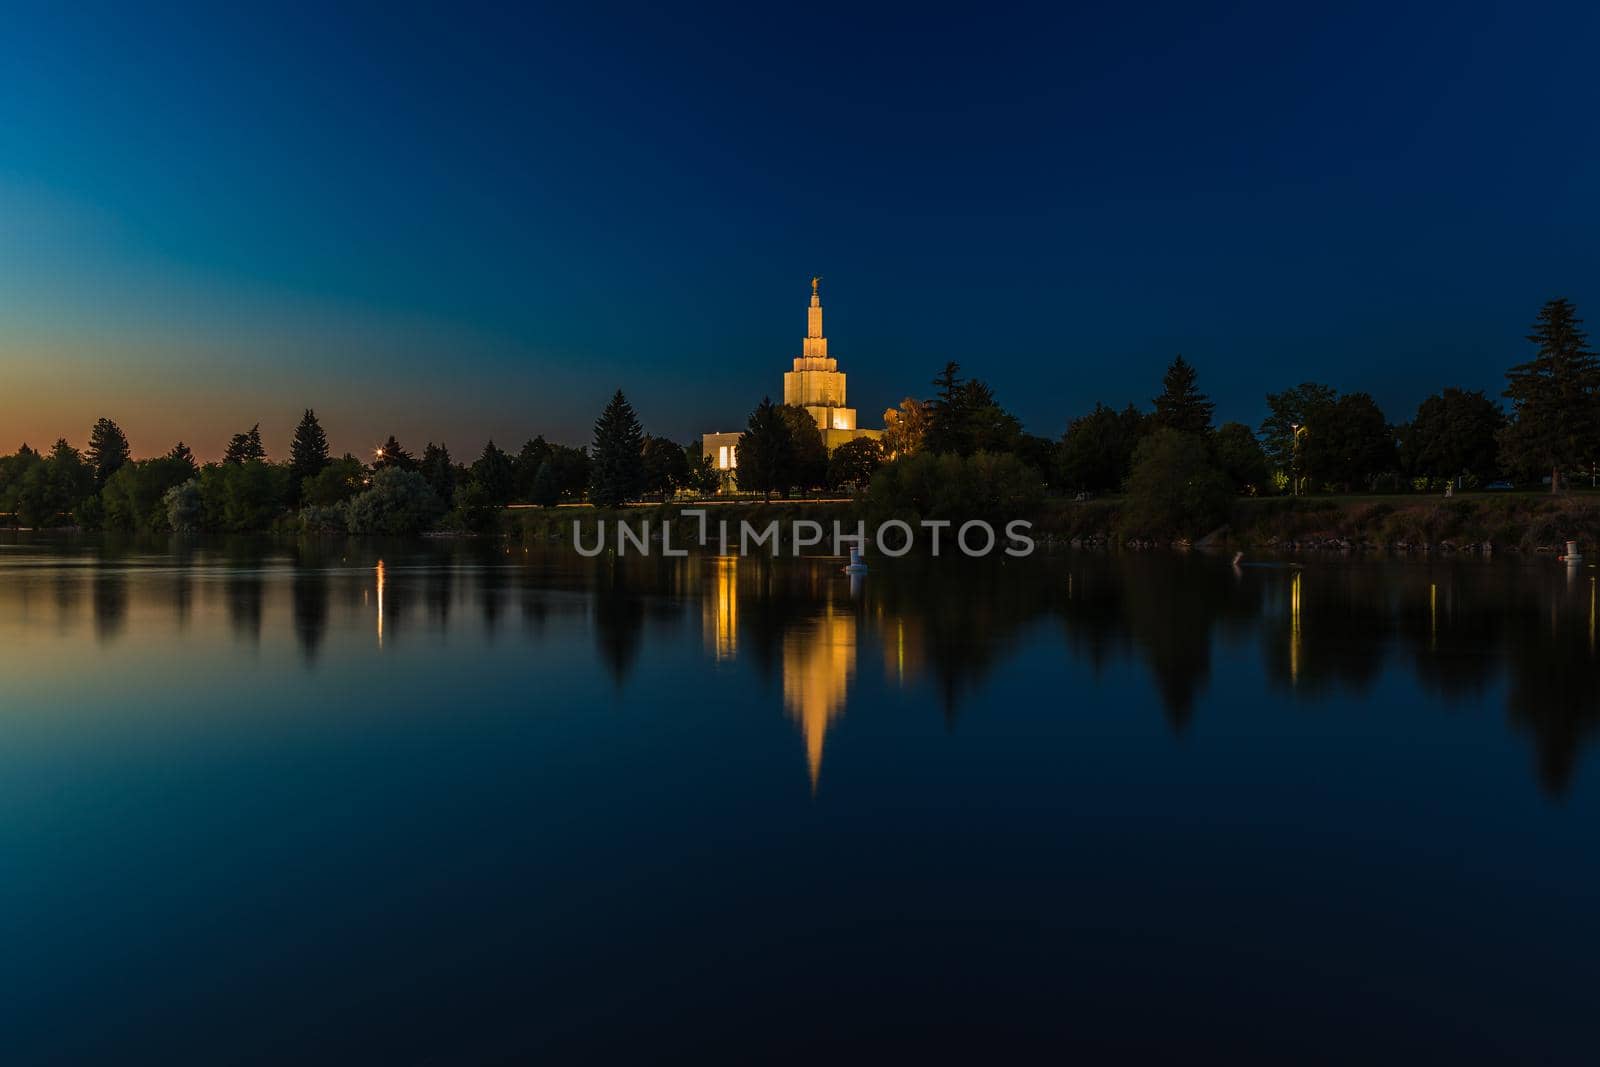 Idaho Falls, Idaho - JUNE 30, 2012: The gleaming Mormon Temple serves as a centerpiece to the city, standing on the banks of the Snake River.